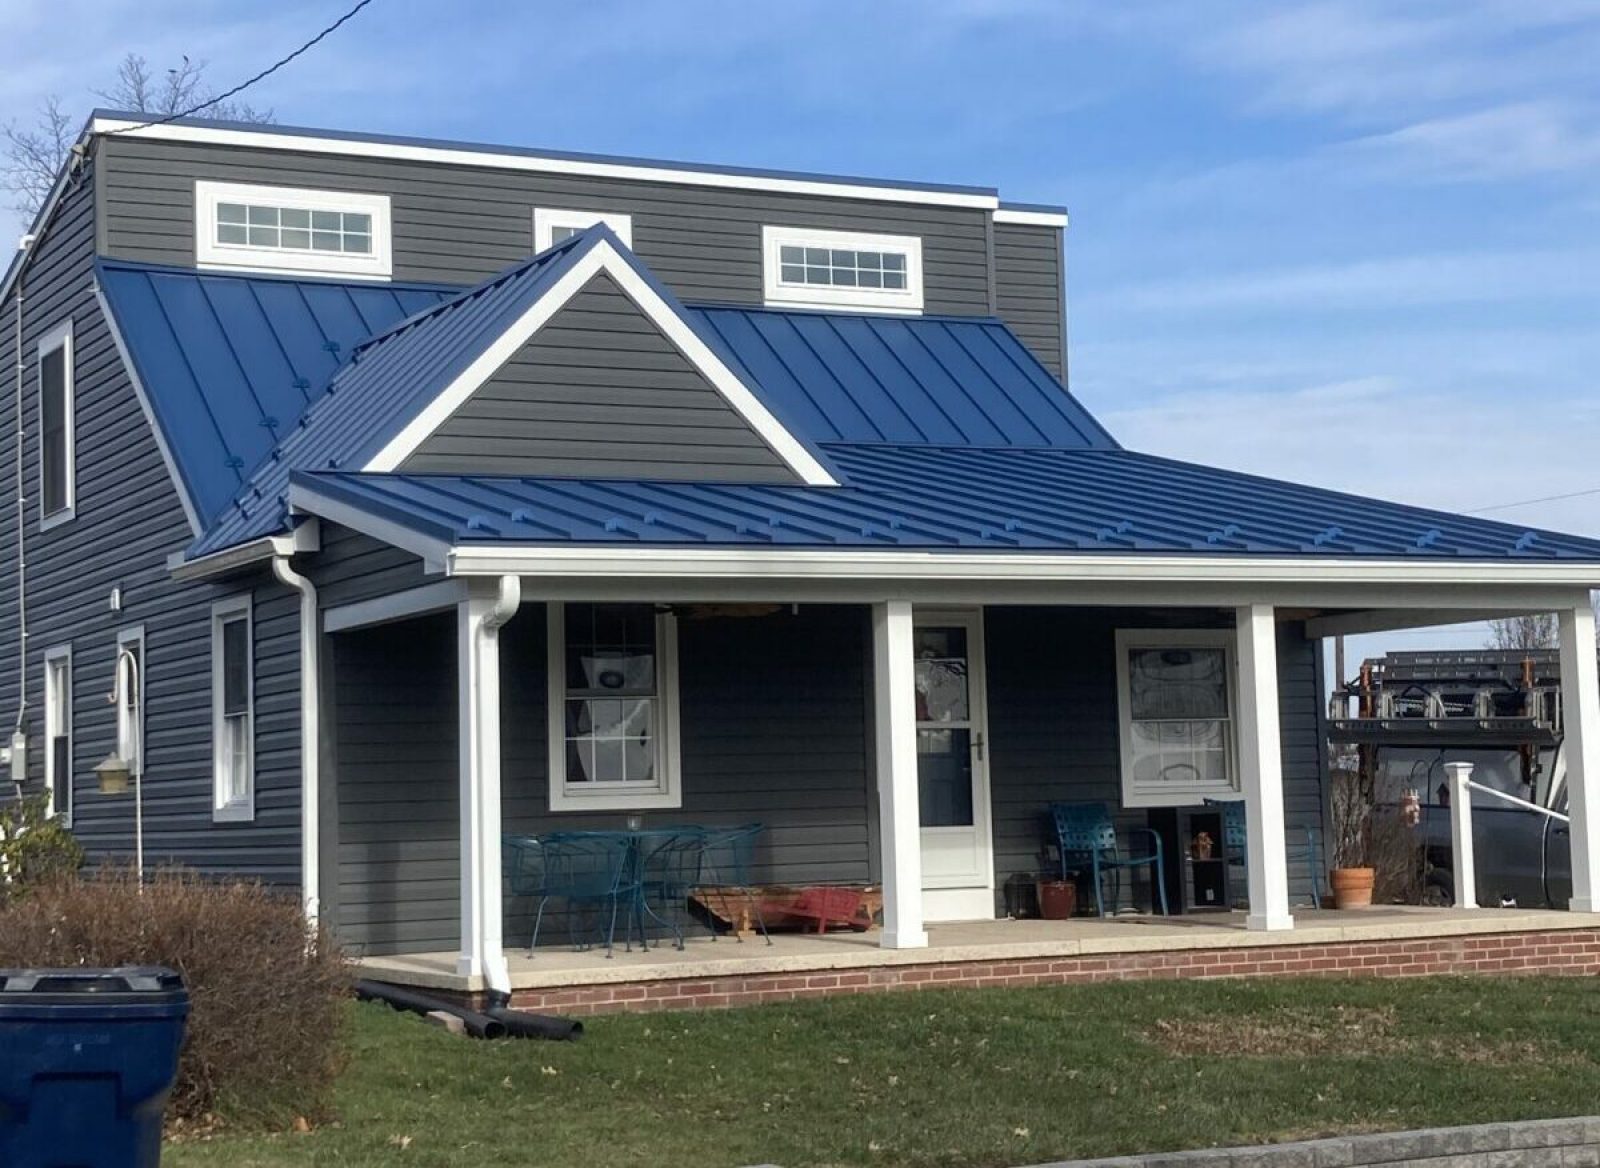 Standing seam metal roof installed Terre Hill, PA, Lancaster Co., PA, 29 gauge standing seam metal, color: Gallery Blue, January 2022